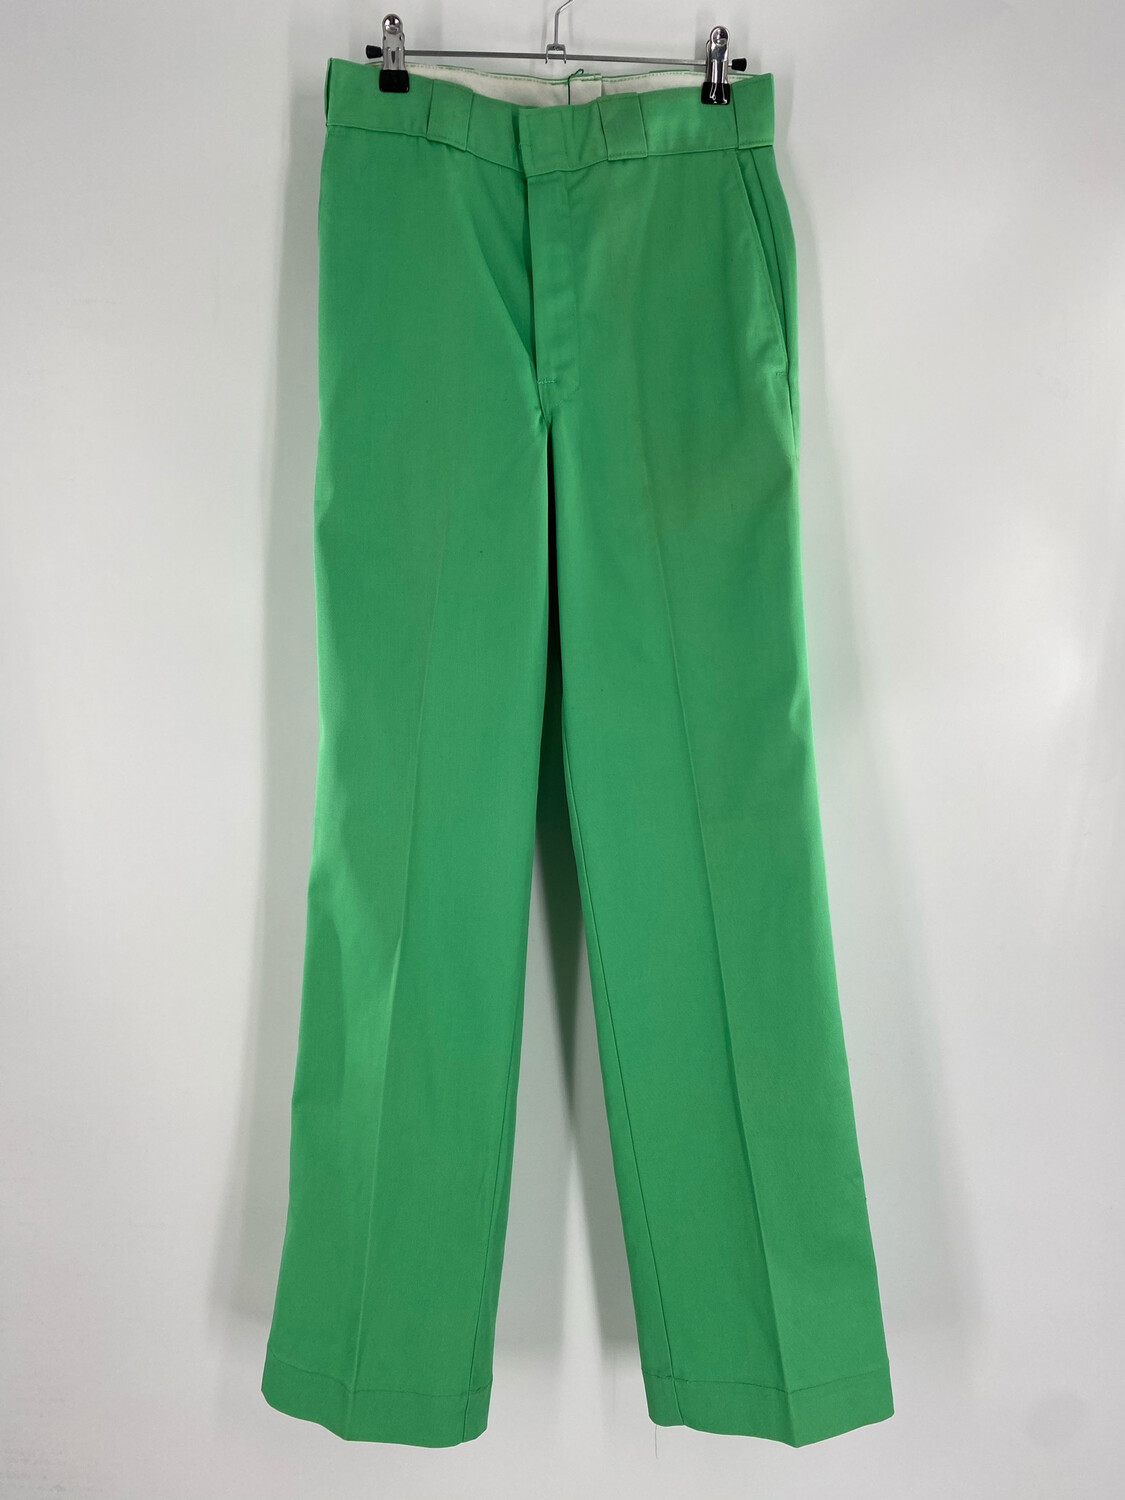 Dickies Green Vintage Trousers Size S